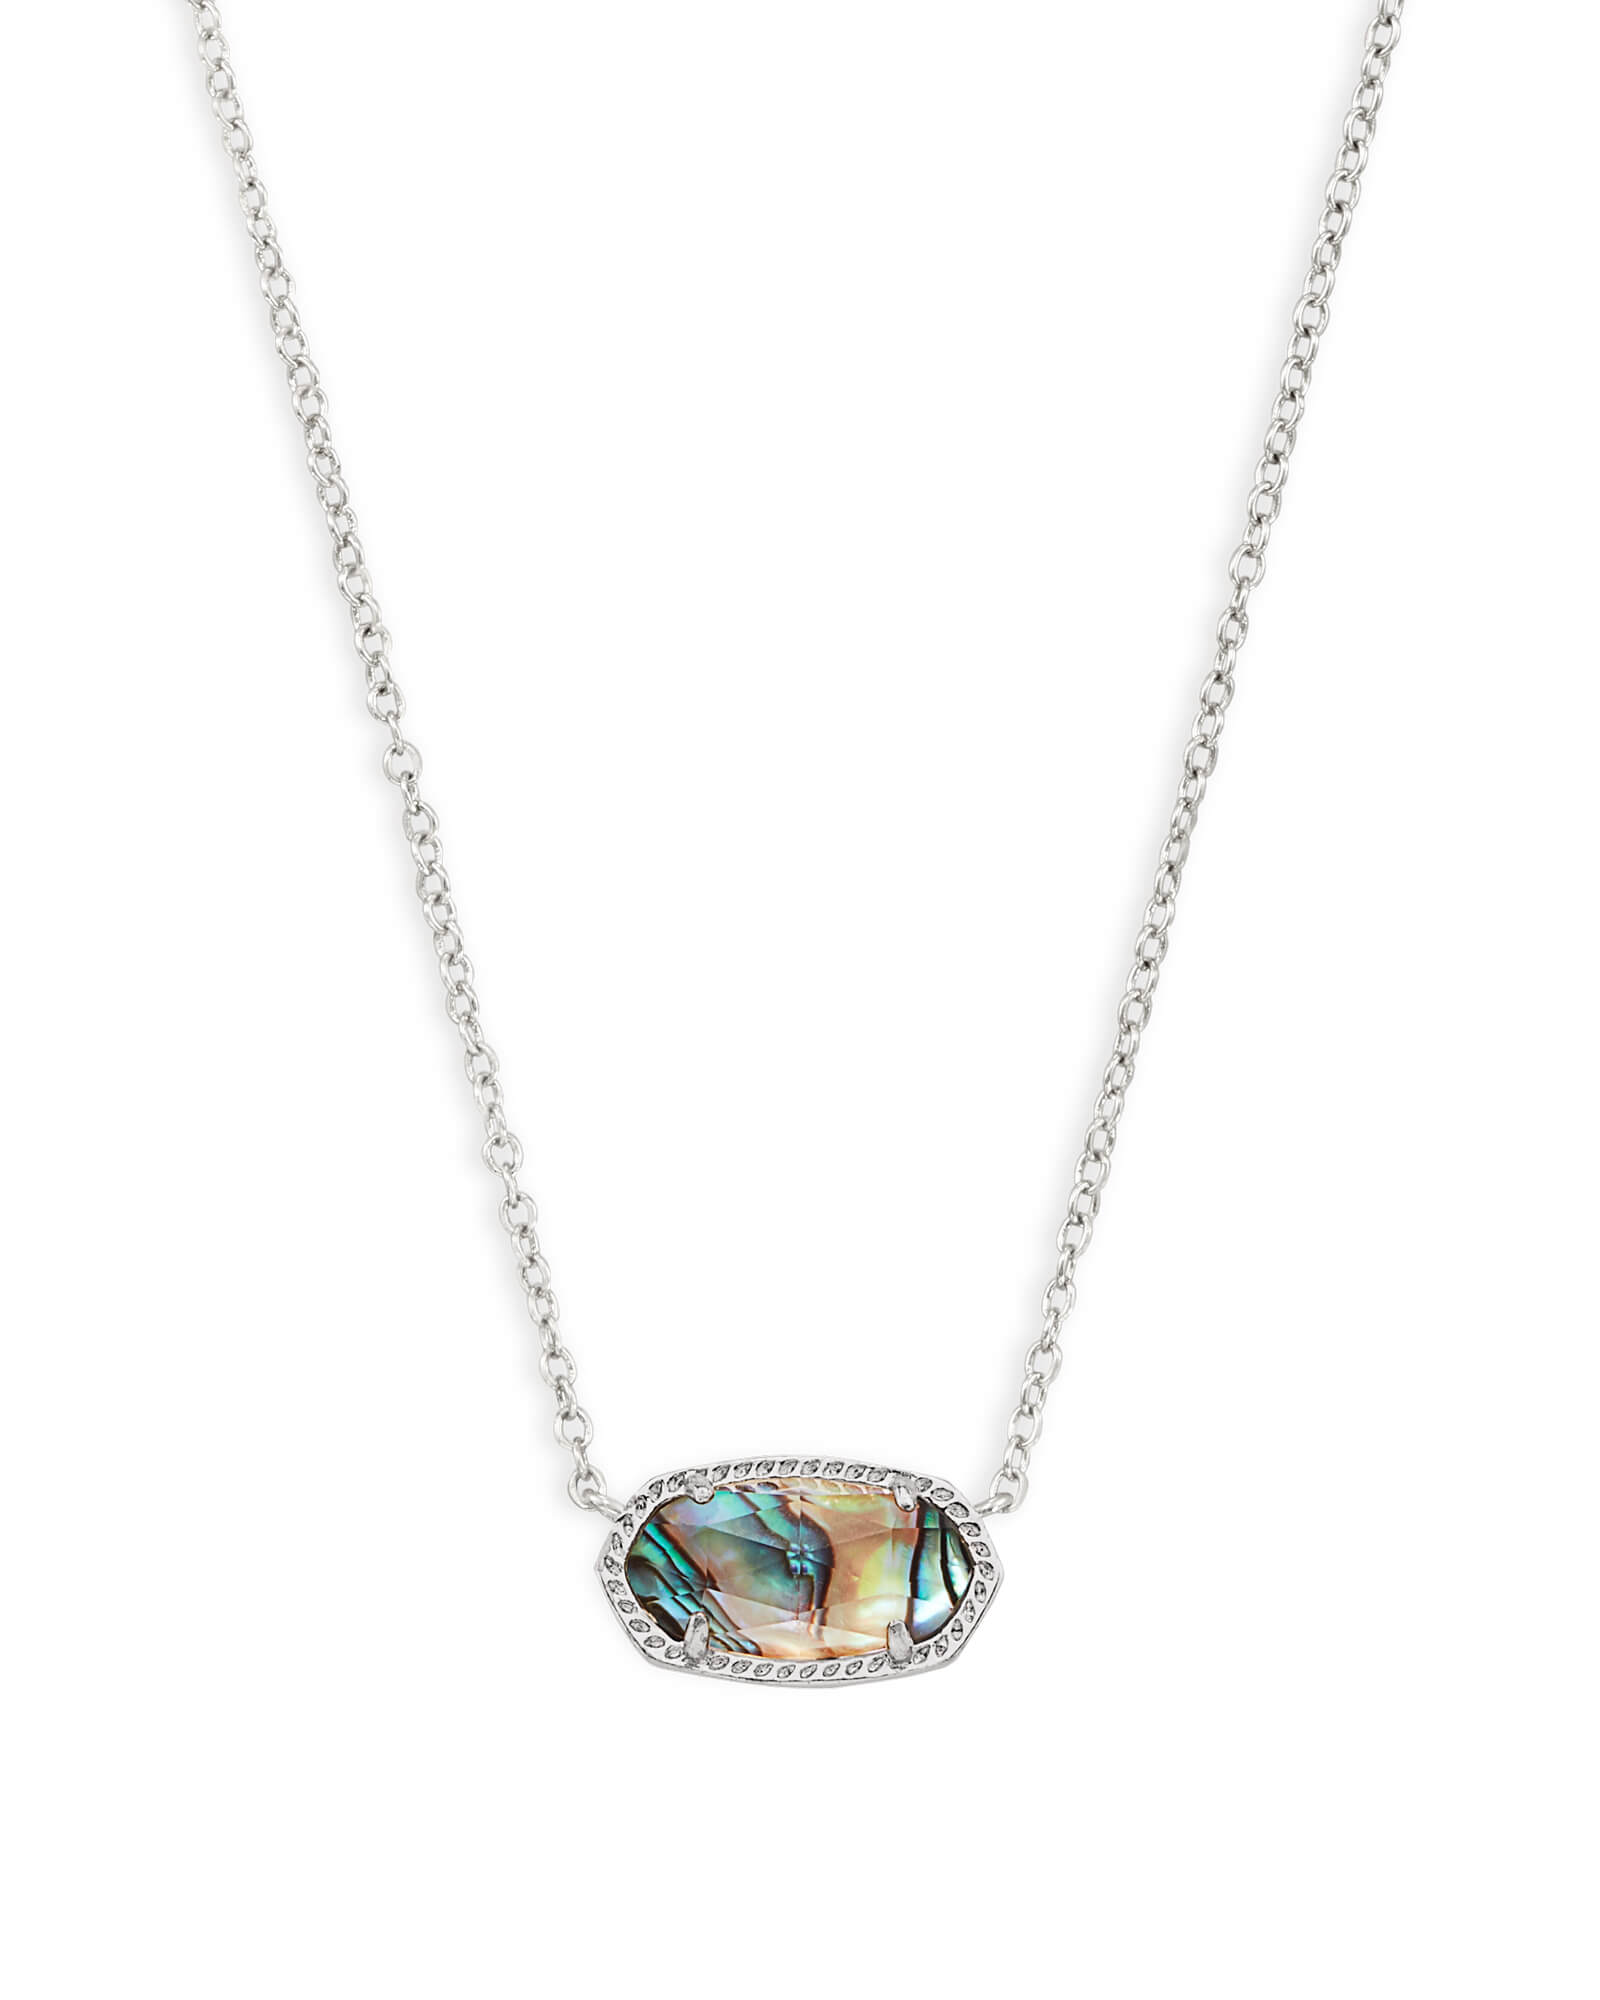 KENDRA SCOTT ELISA COLLECTION RHODIUM PLATED BRASS FASHION NECKLACE WITH ABALONE SHELL